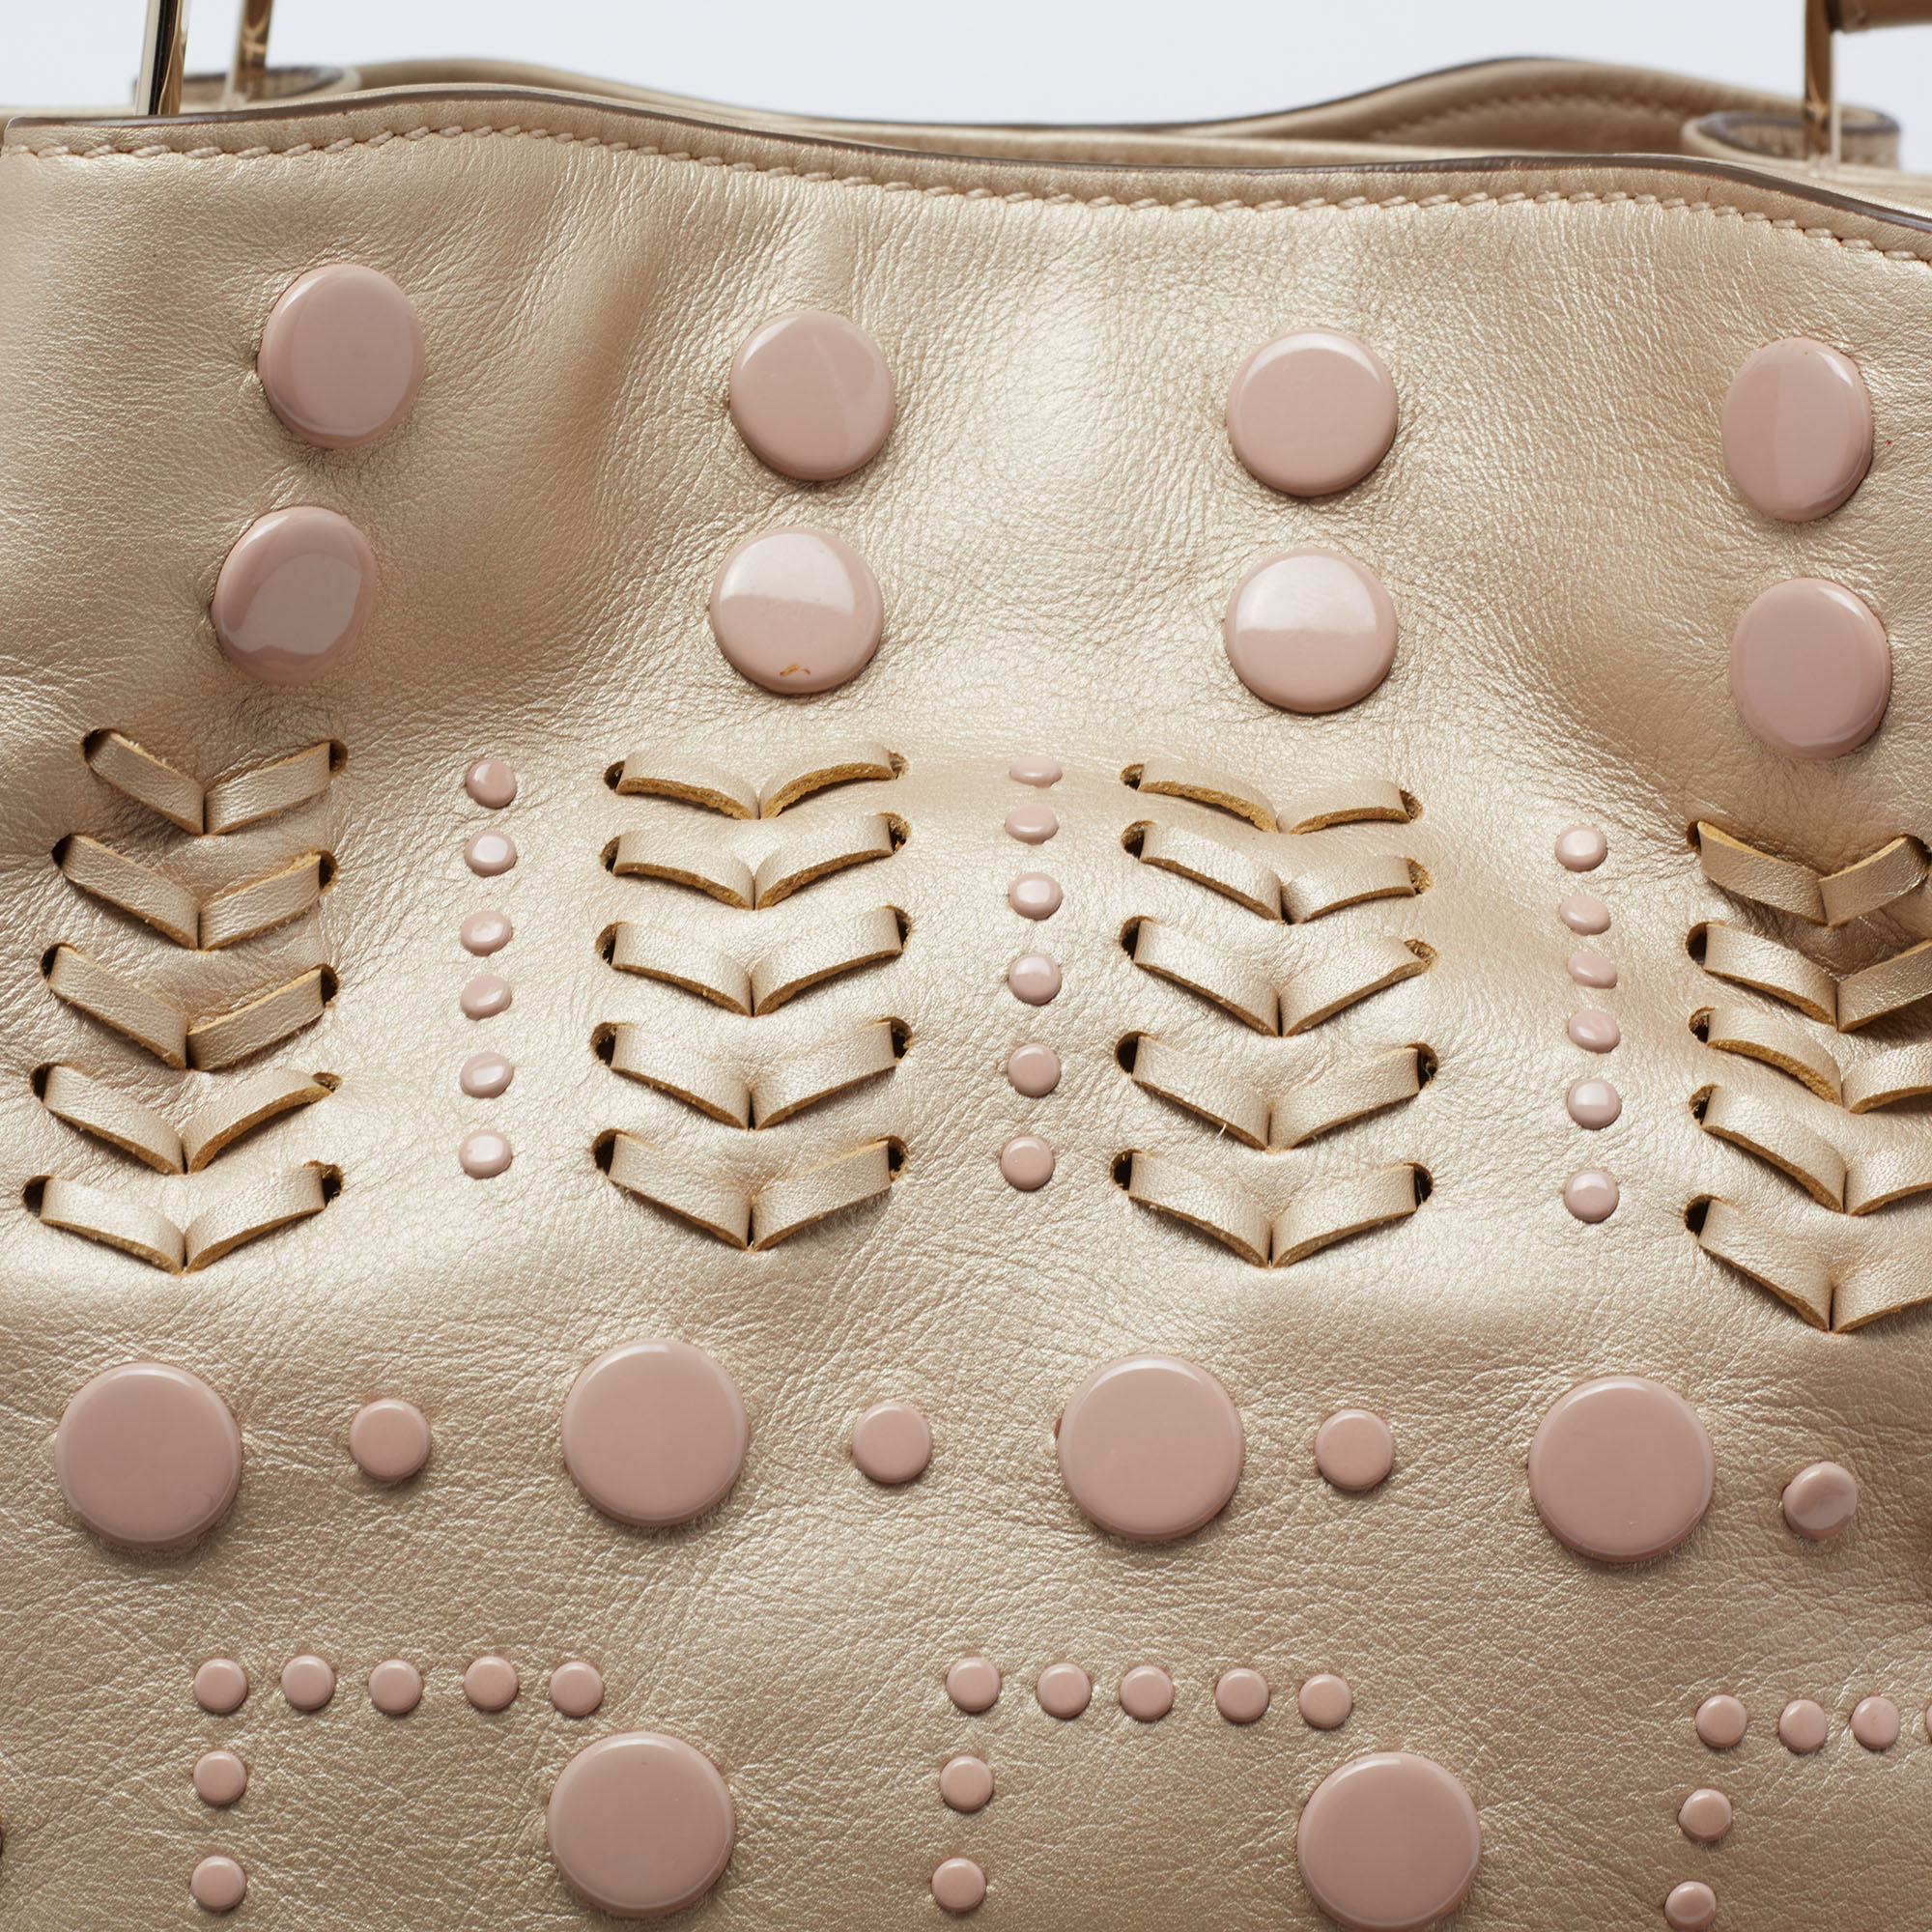 Tod's Metallic Beige Leather Studded Flower Tote